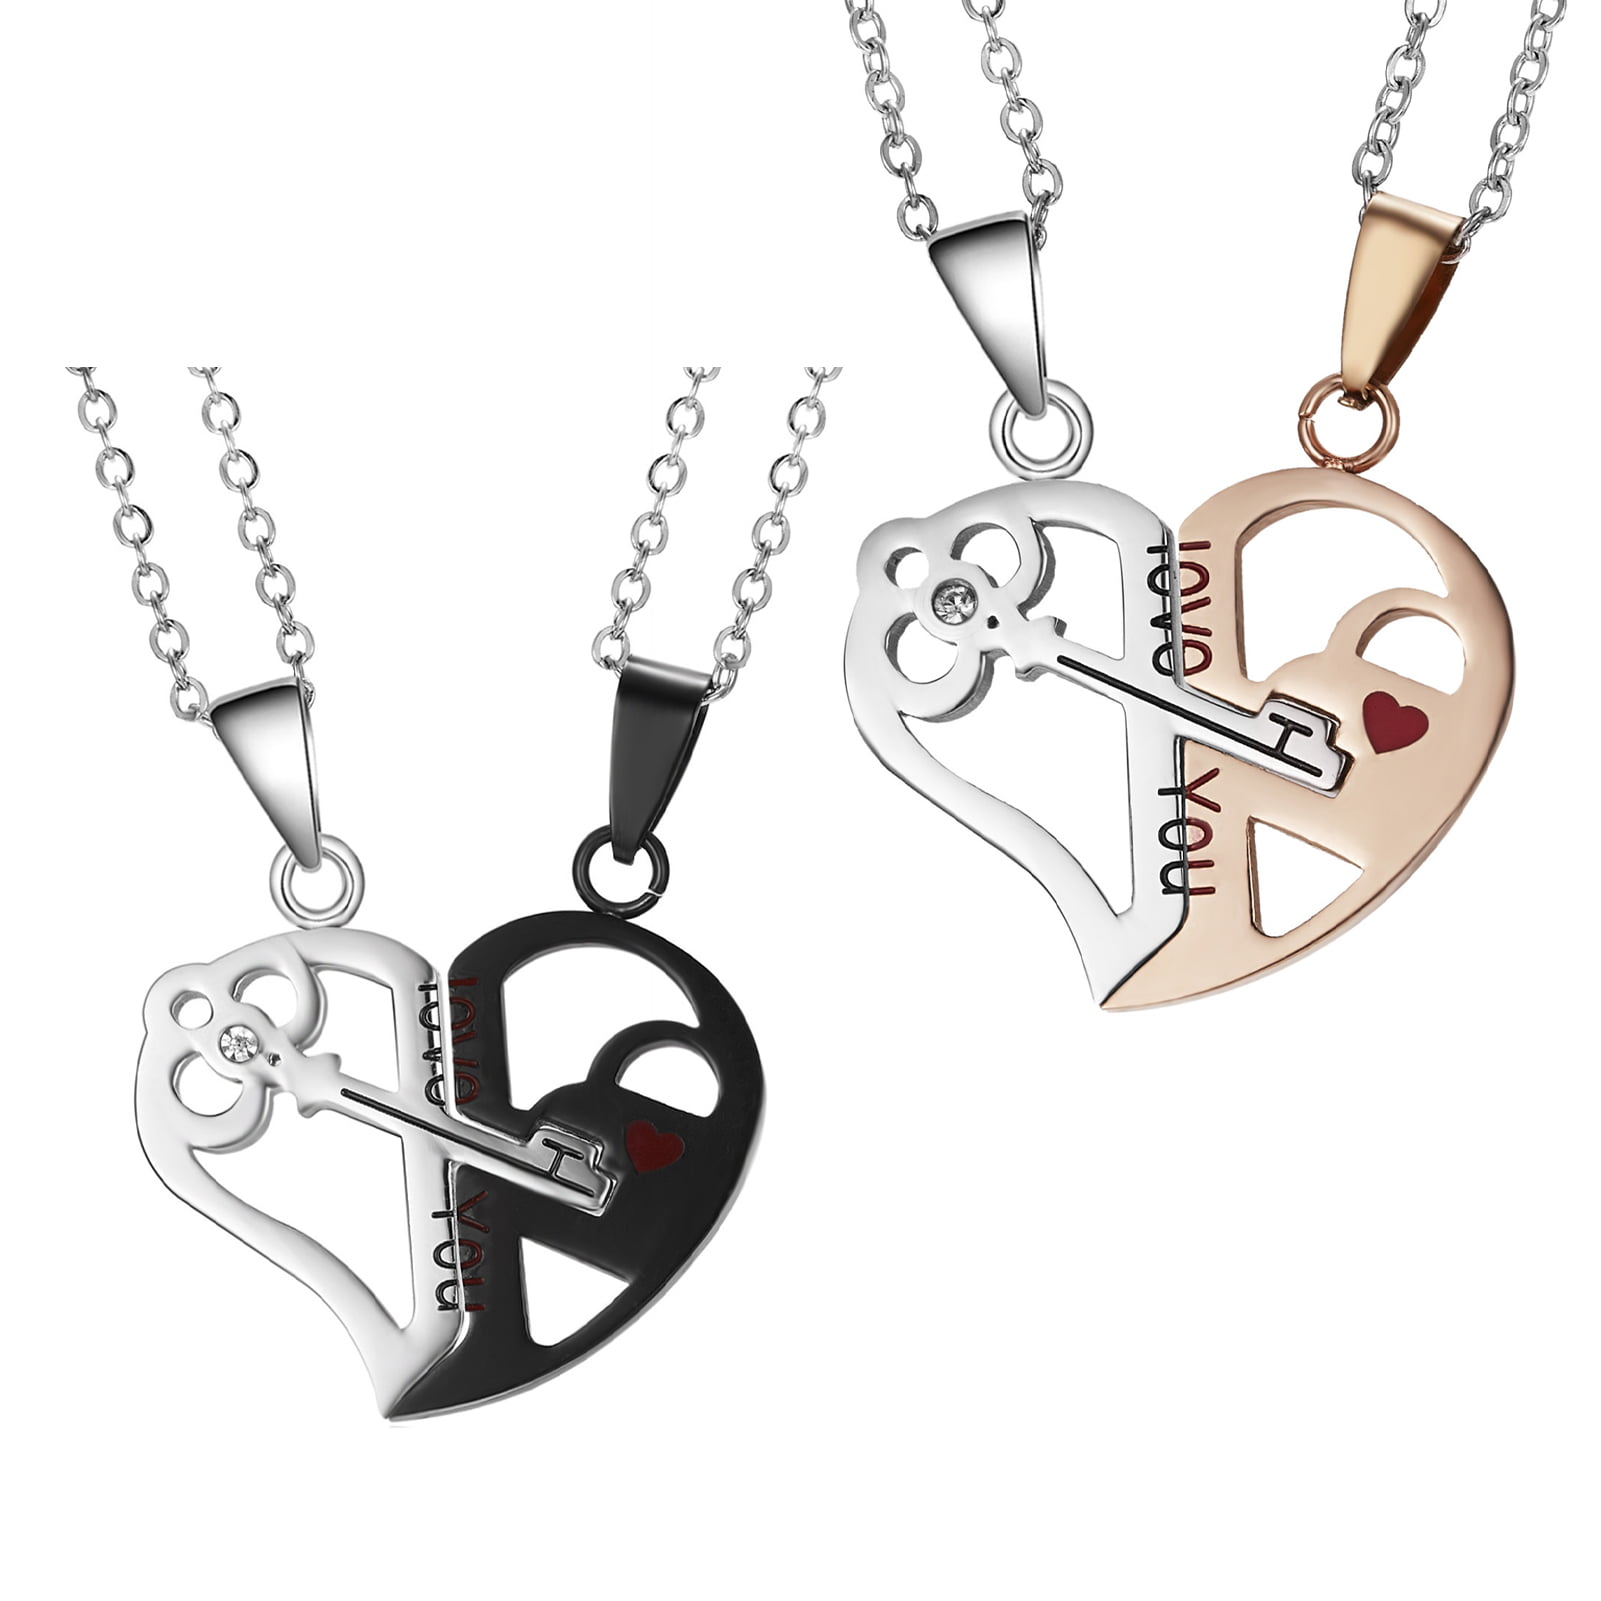 Source heart shape puzzle key pendant necklace meaning for couples jewelry  on m.